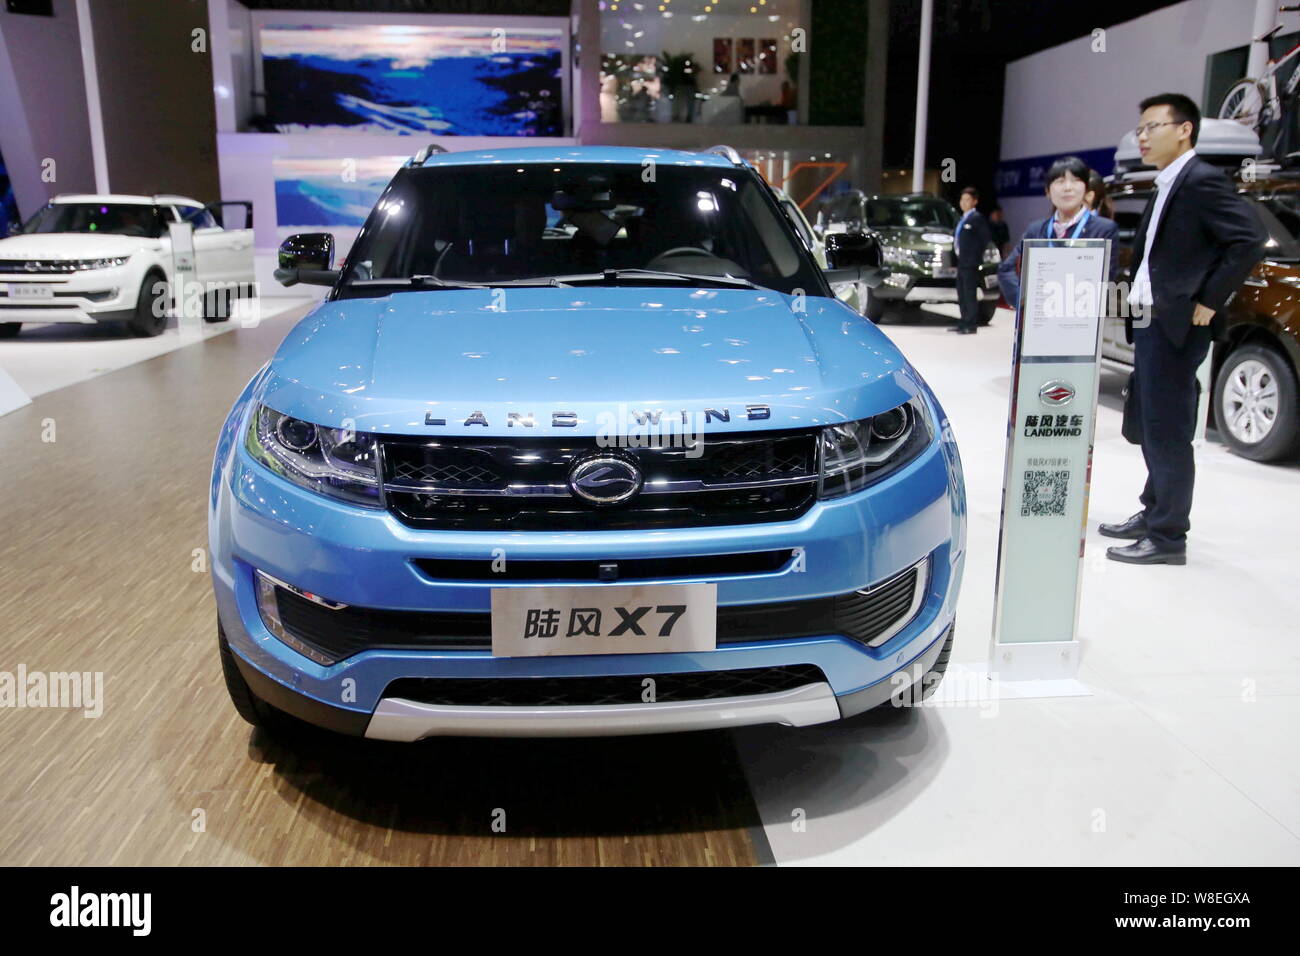 --FILE--A Landwind X7 SUV of JMC (Jiangling Motor Co.), which resembles the Range Rover Evoque of Jaguar Land Rover, is on display during the 16th Sha Stock Photo